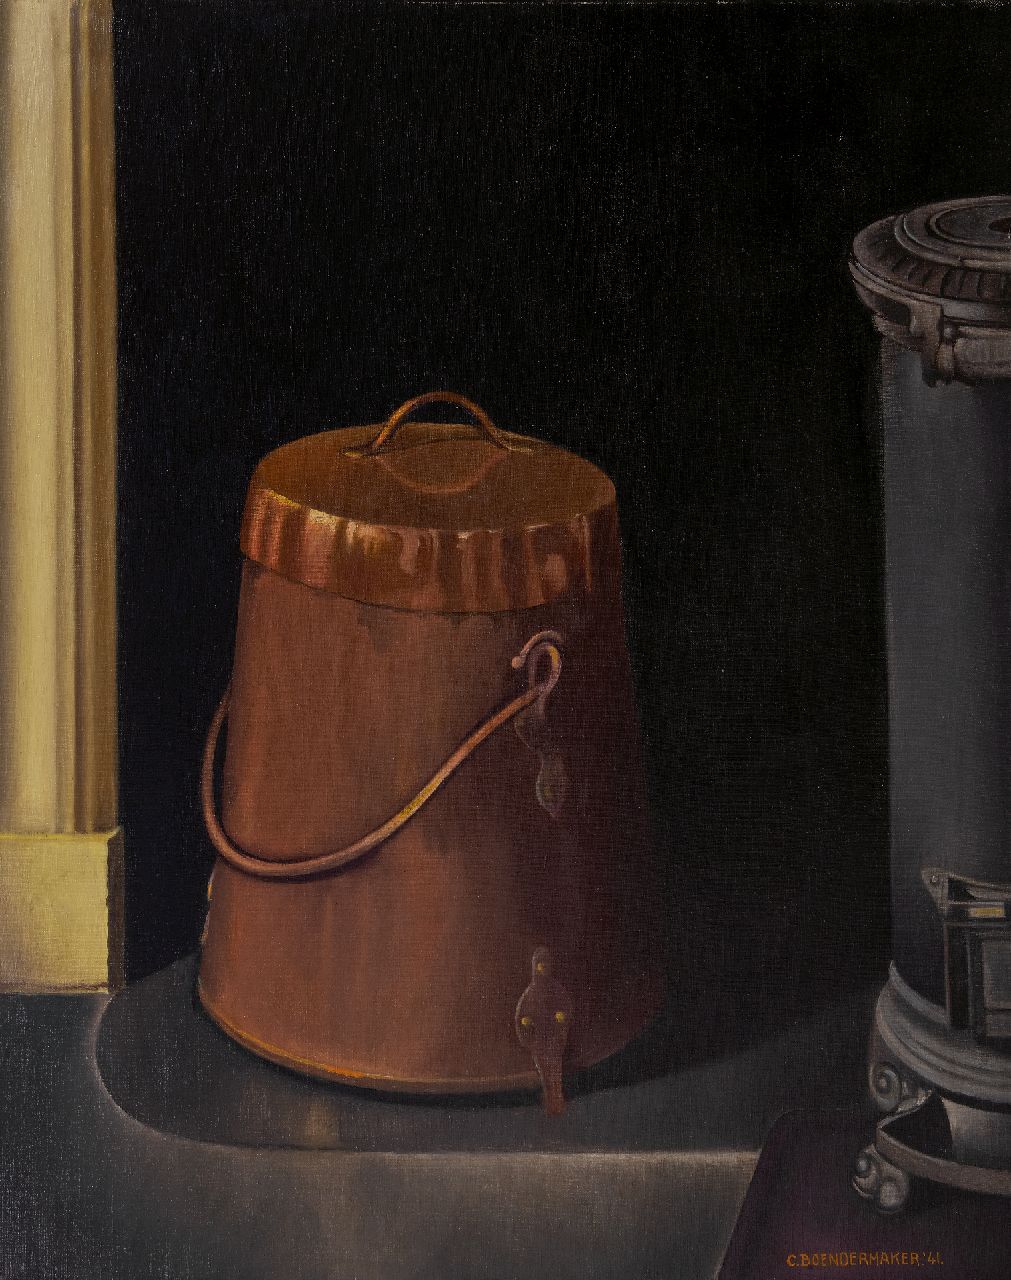 Boendermaker C.  | Cornelis 'Kees' Boendermaker | Paintings offered for sale | Still life with a copper pot and stove, oil on canvas 83.4 x 67.5 cm, signed l.r. and dated '41